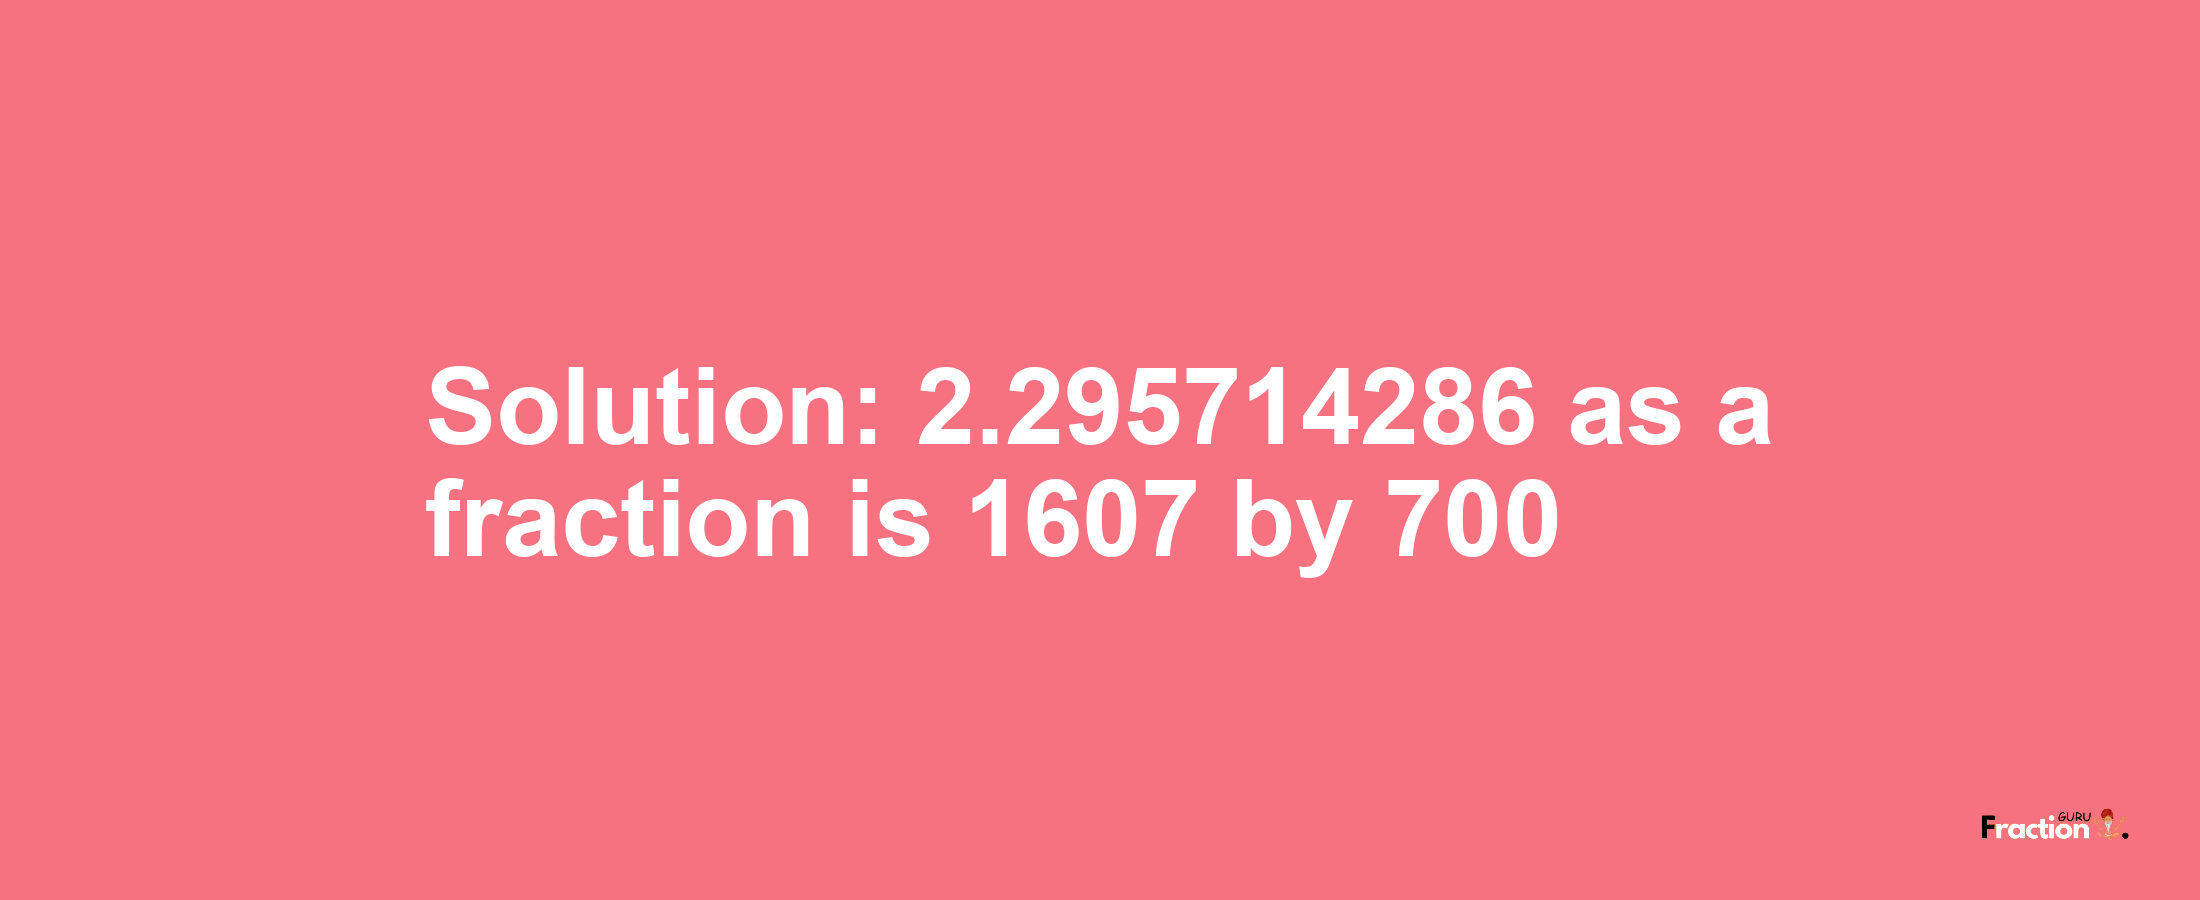 Solution:2.295714286 as a fraction is 1607/700